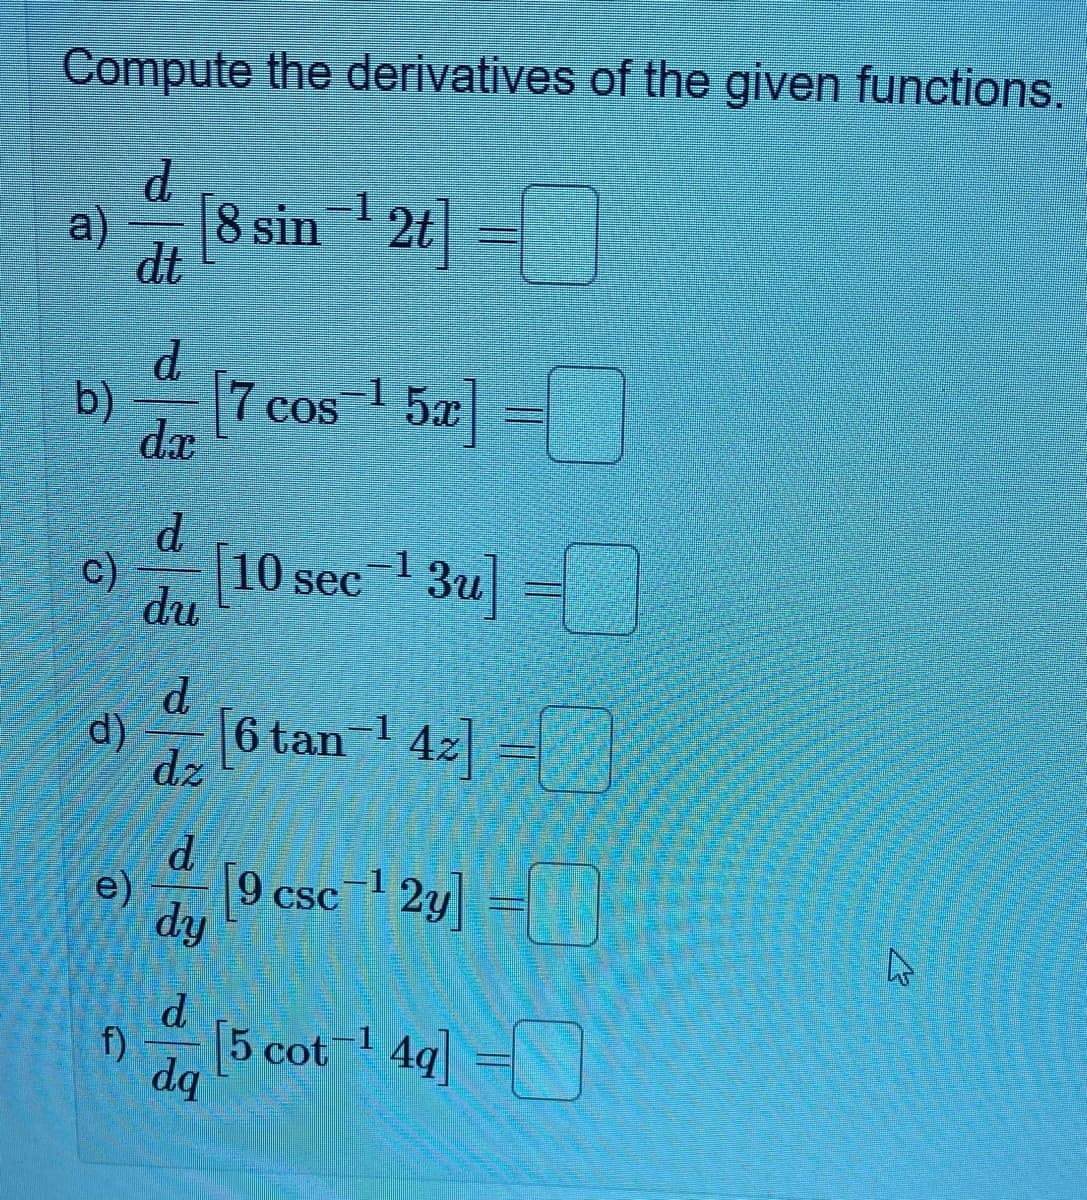 Compute the derivatives of the given functions.
d
a)
8 sin 1 2t] =
dt
d.
b)
|7 cos 1 5æ|
dx
d.
c)
du
sec 1 3u]
] -
d.
d)
6 tan 1 42] =
dz
e)
9 csc 1 2y] =
dy
d.
f)
dq
(5 cot 4q] =
